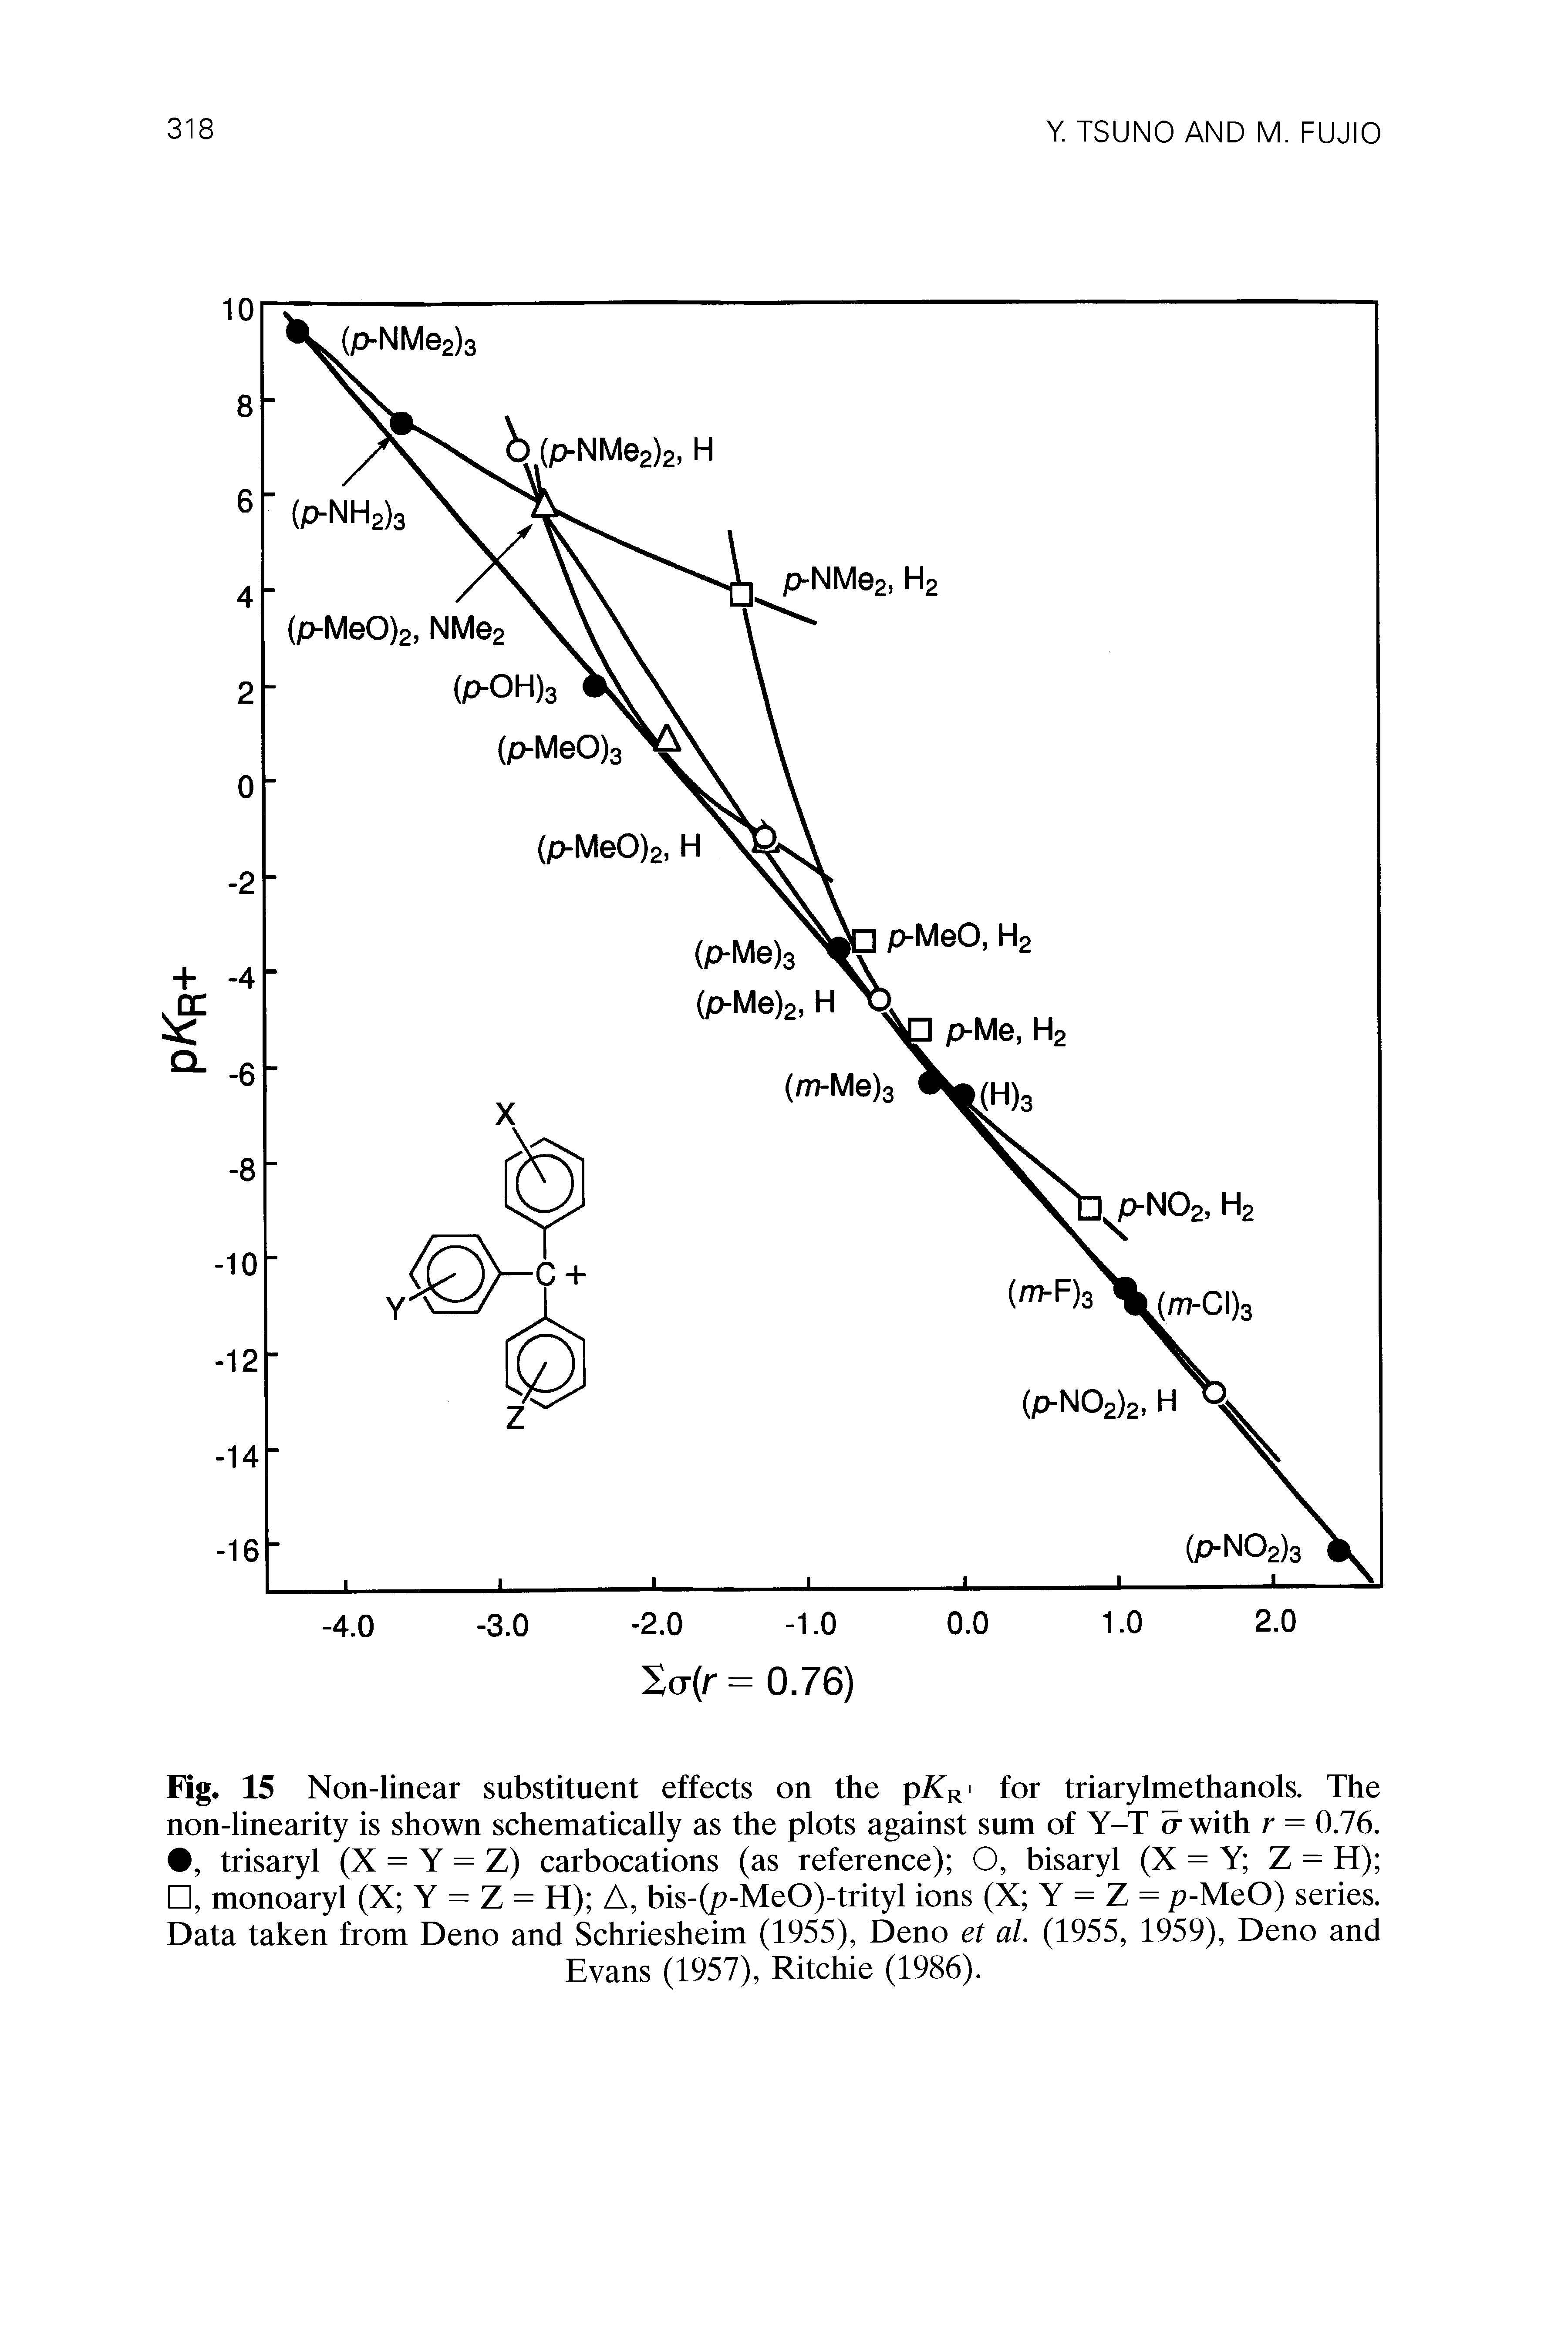 Fig. 15 Non-linear substituent effects on the pi R+ for triarylmethanols. The non-linearity is shown schematically as the plots against sum of Y-T a with r = 0.76., trisaryl (X = Y = Z) carbocations (as reference) O, bisaryl (X = Y Z = H) , monoaryl (X Y = Z = H) A, bis-(p-MeO)-trityl ions (X Y = Z = p-MeO) series. Data taken from Deno and Schriesheim (1955), Deno et al. (1955, 1959), Deno and...